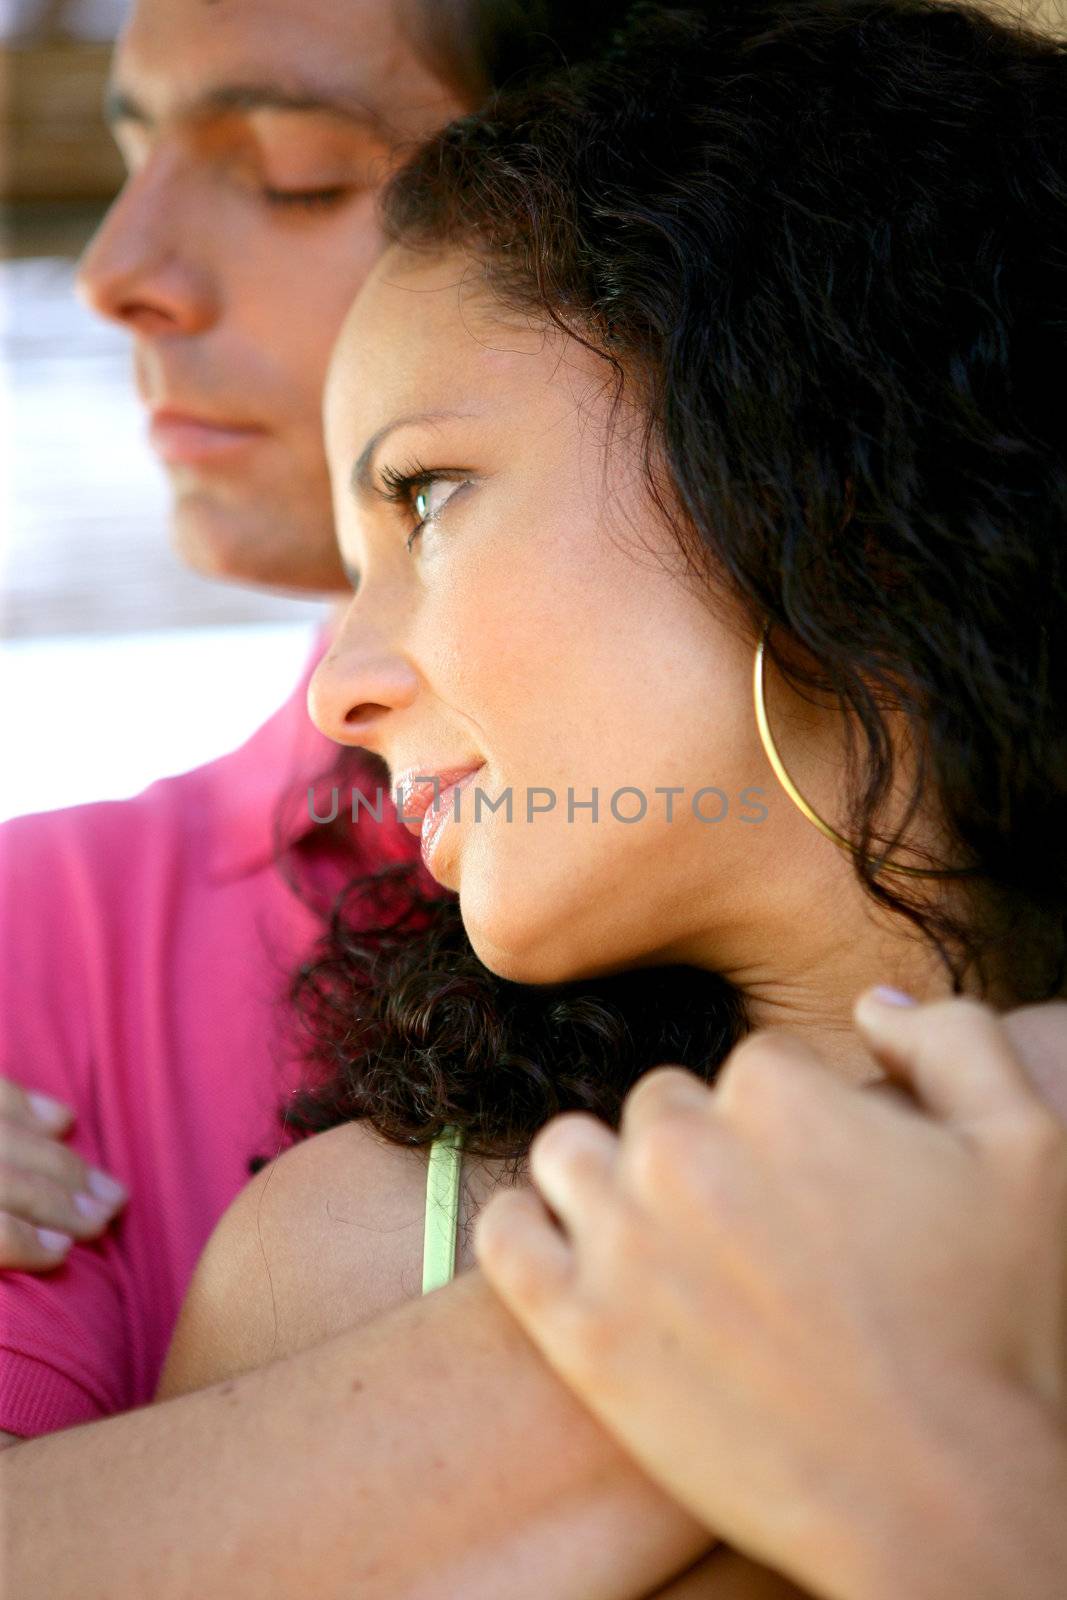 Young couple in a restful embrace